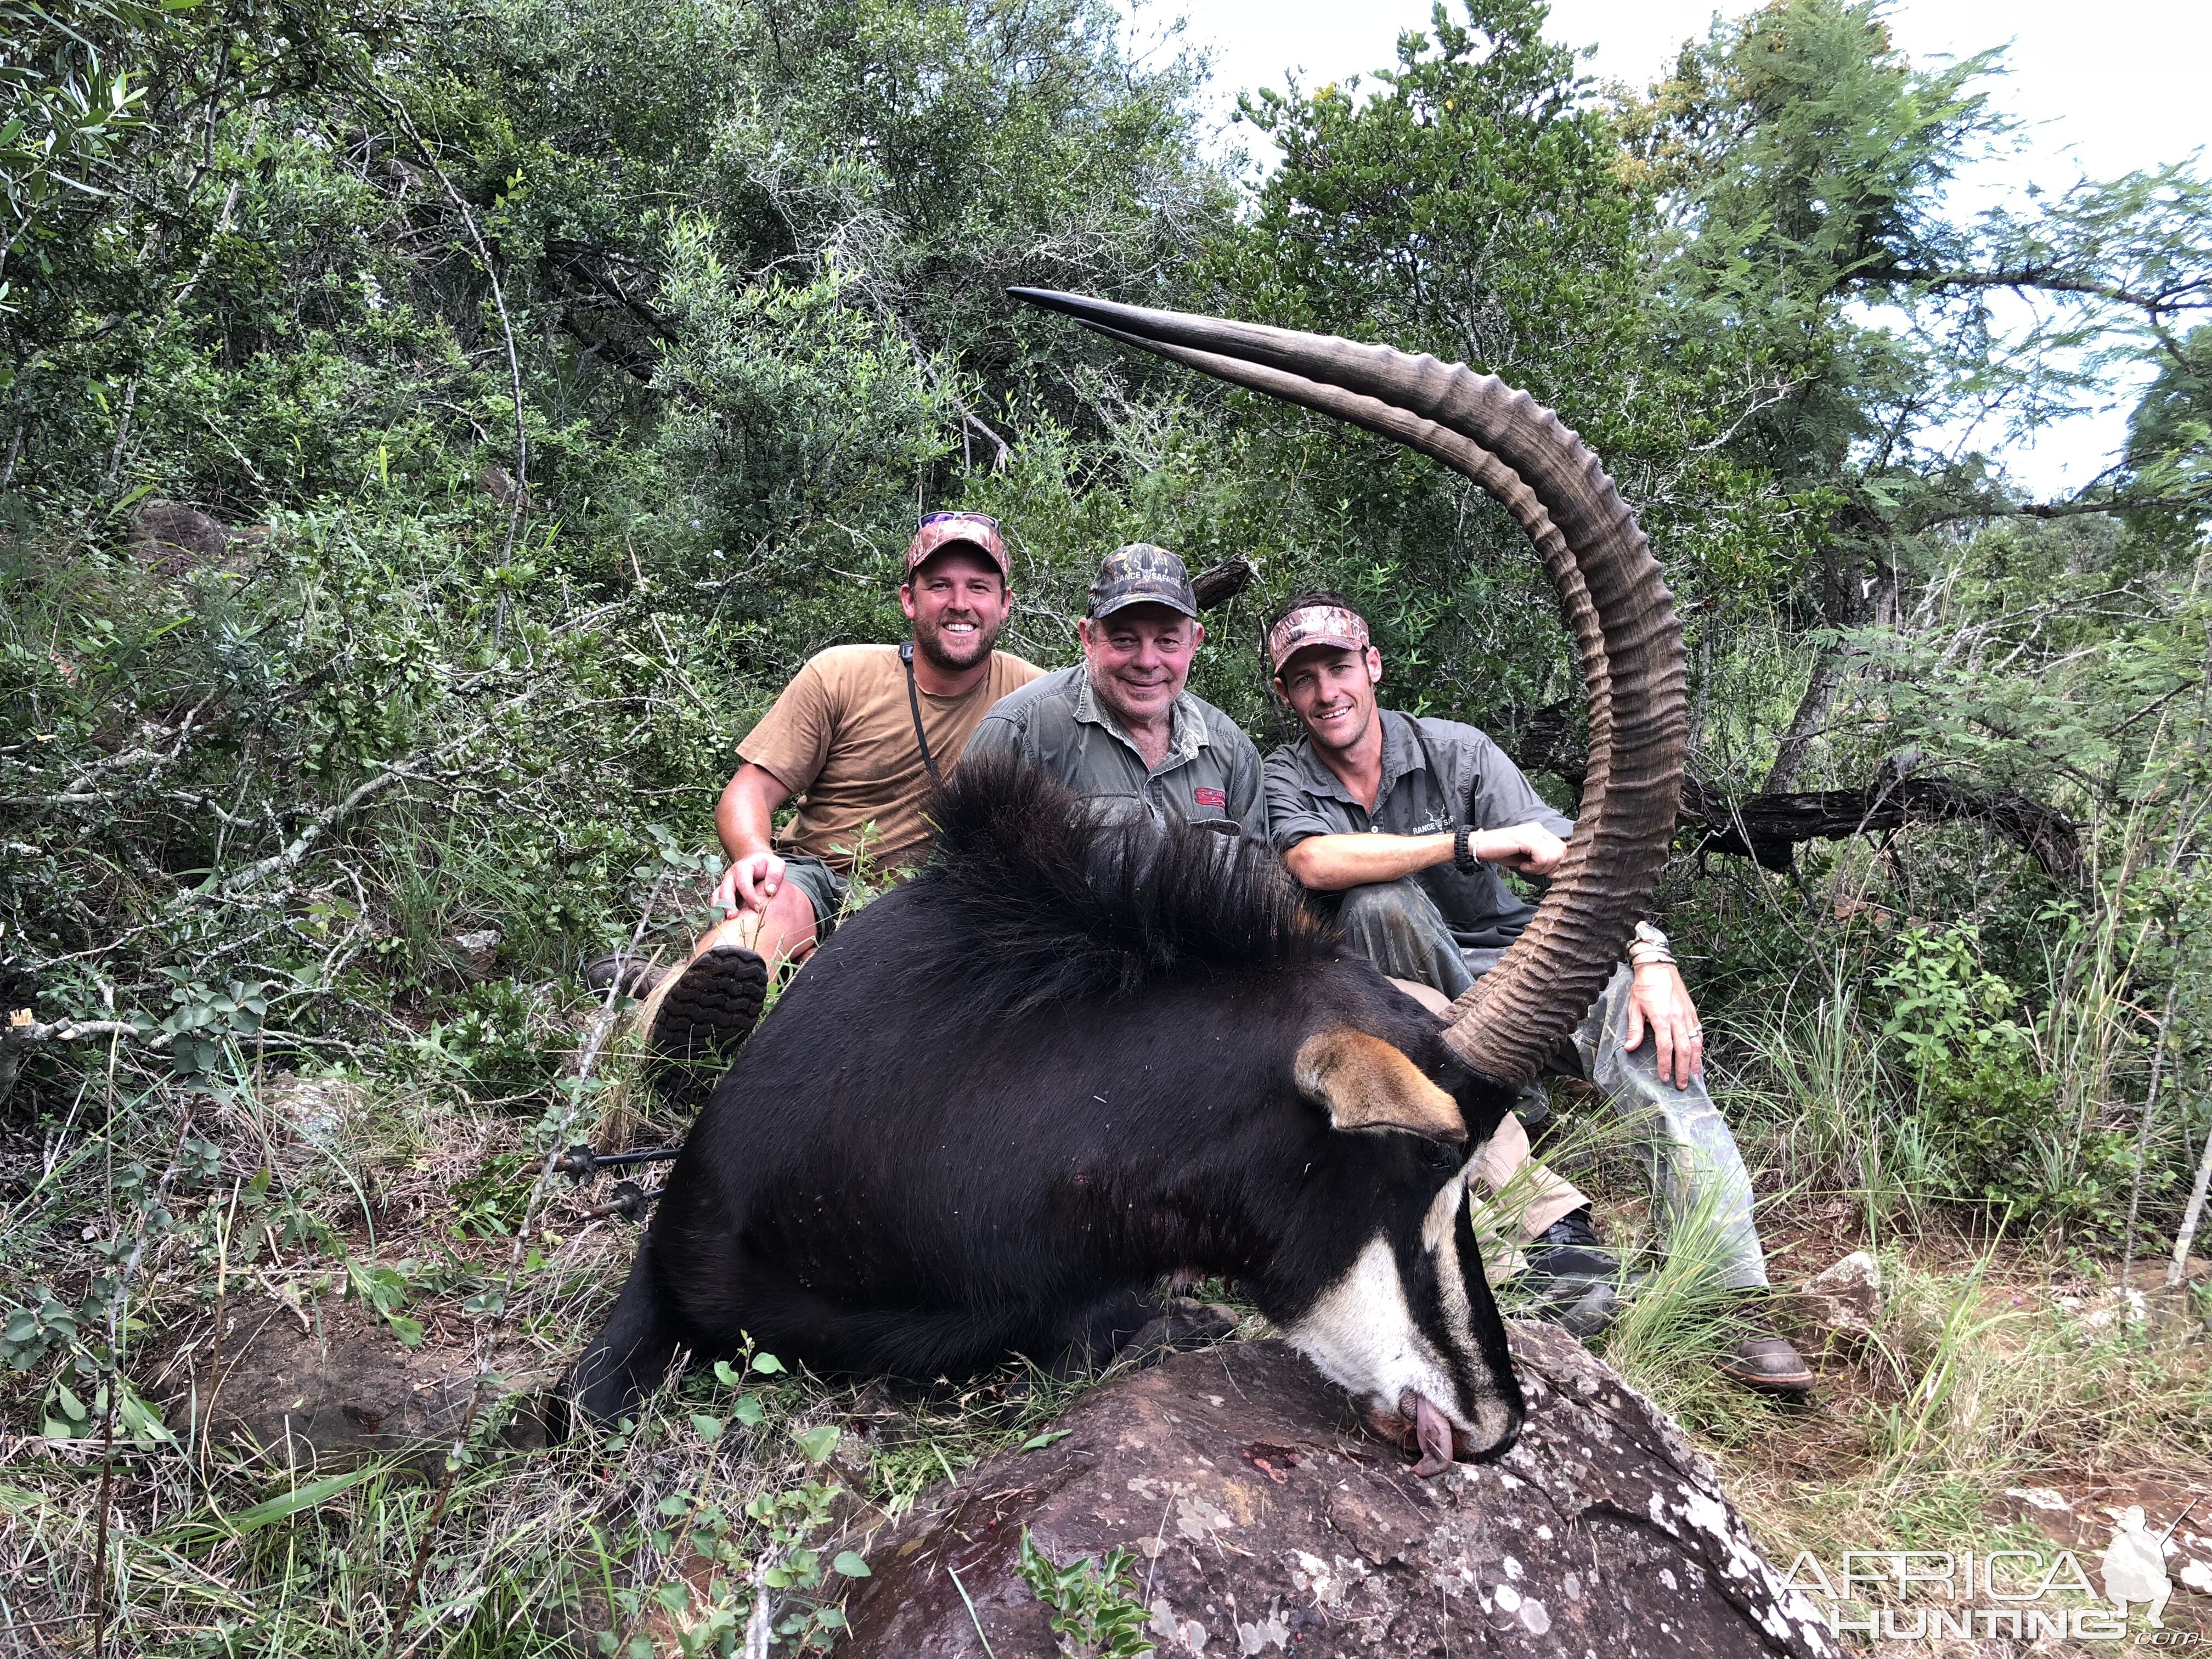 South Africa Hunting Sable